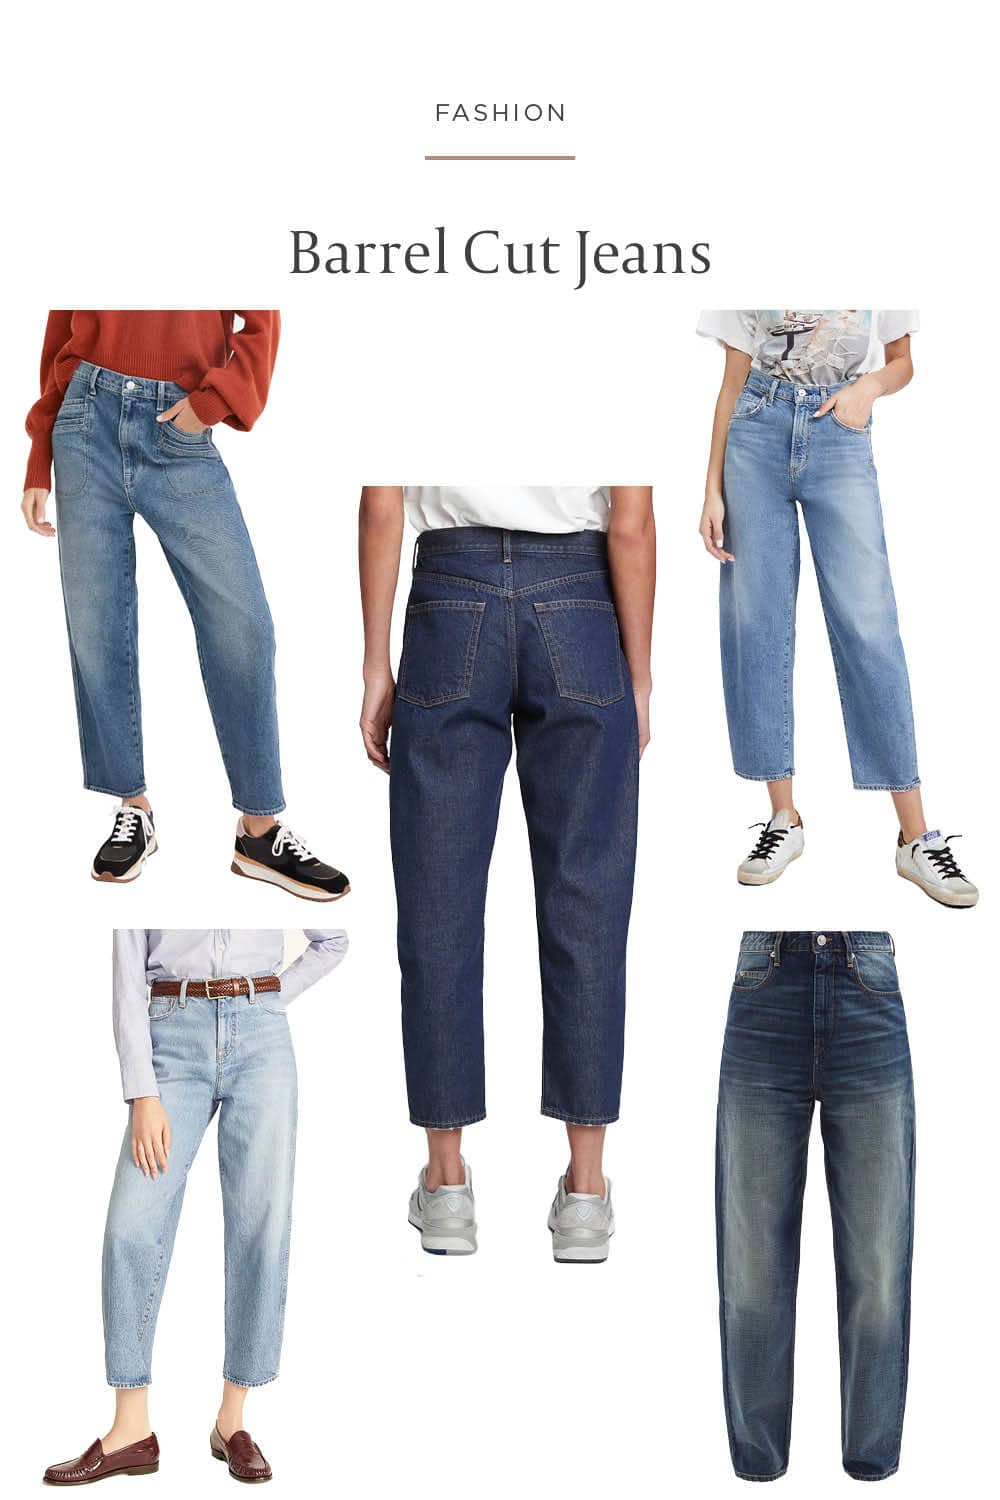 Trending Jeans - Barrel Cut a straight cut with a tapered ankle